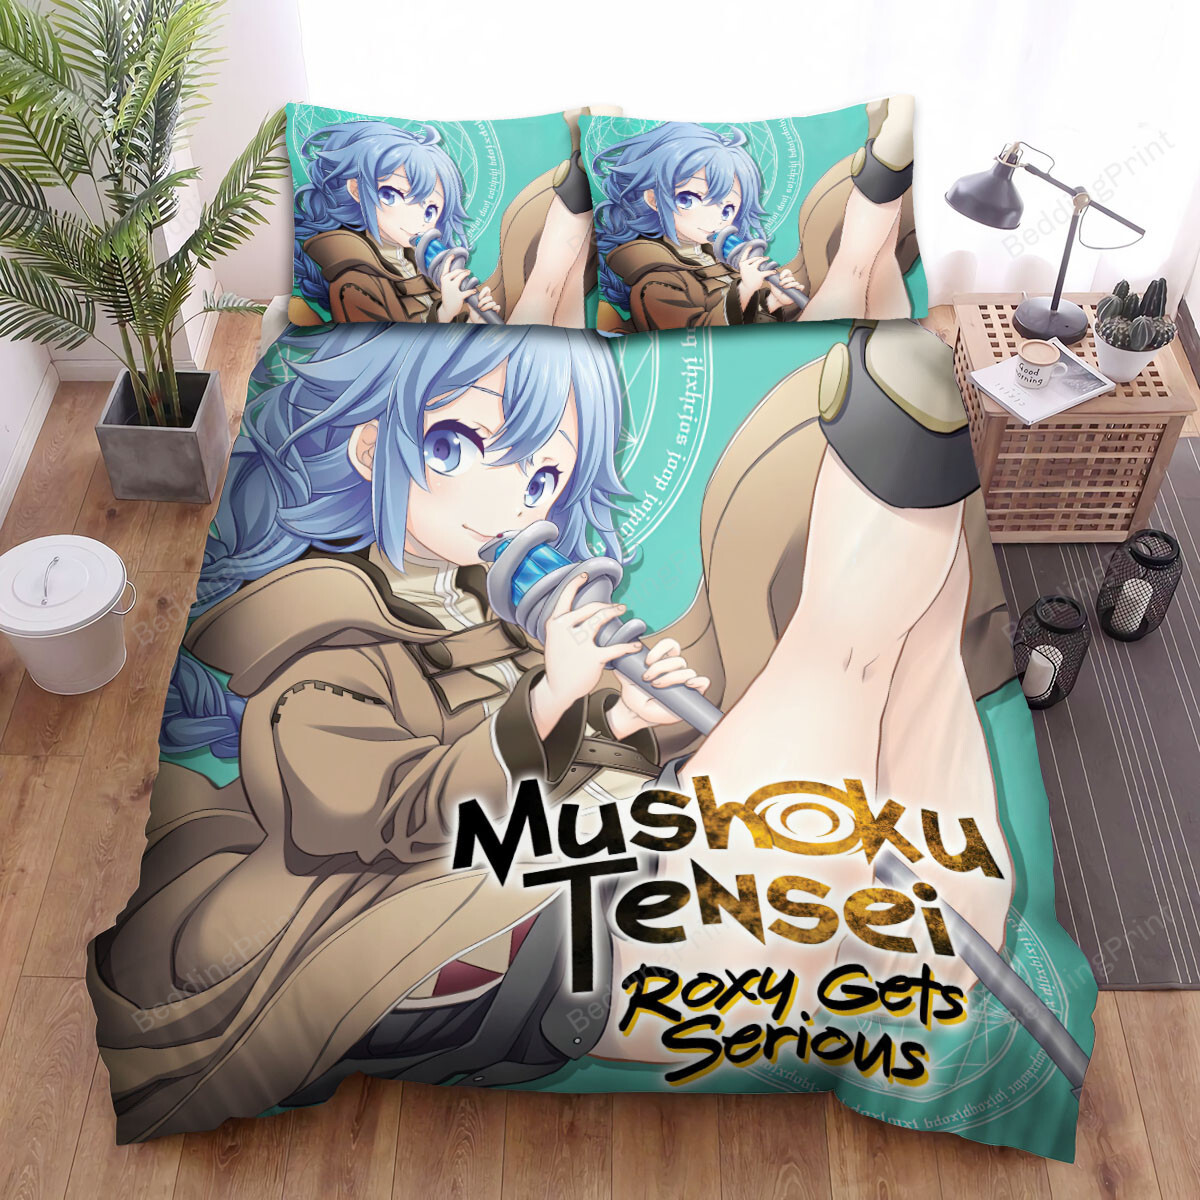 Mushoku Tensei Roxy Gets Serious Volume 2 Art Cover Bed Sheets Spread Duvet Cover Bedding Sets